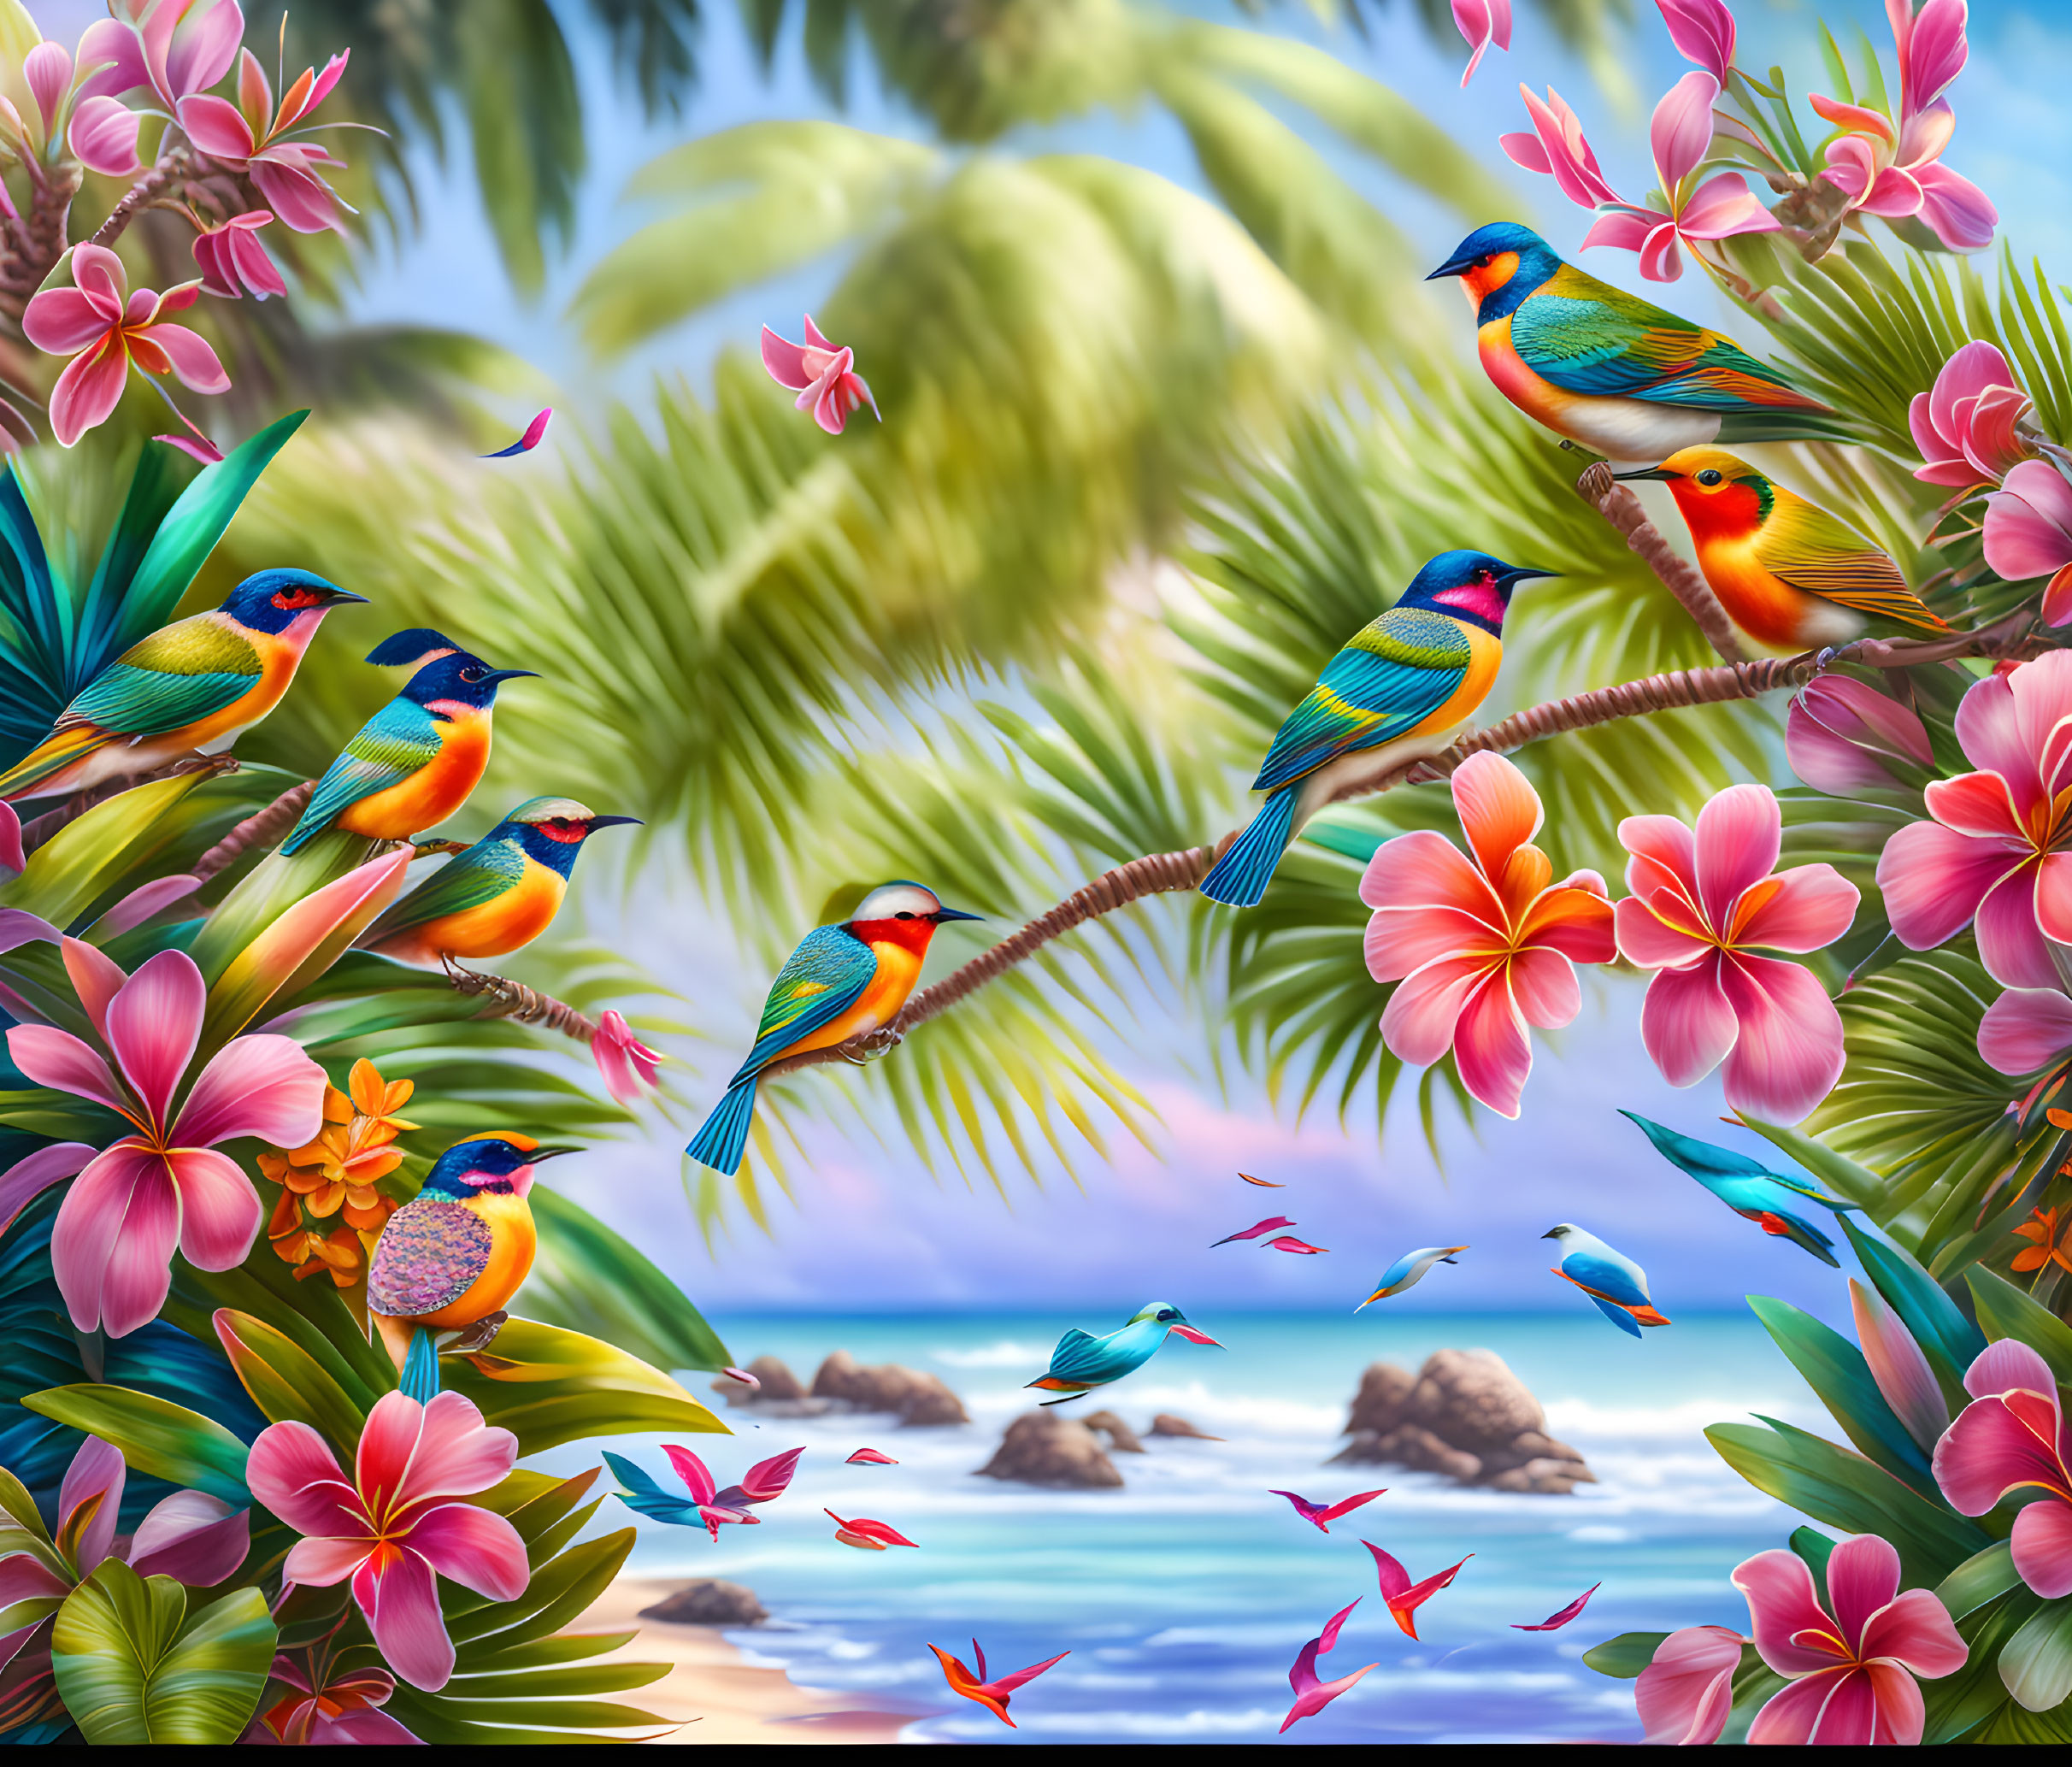 Tropical Paradise: Birds and Blooms